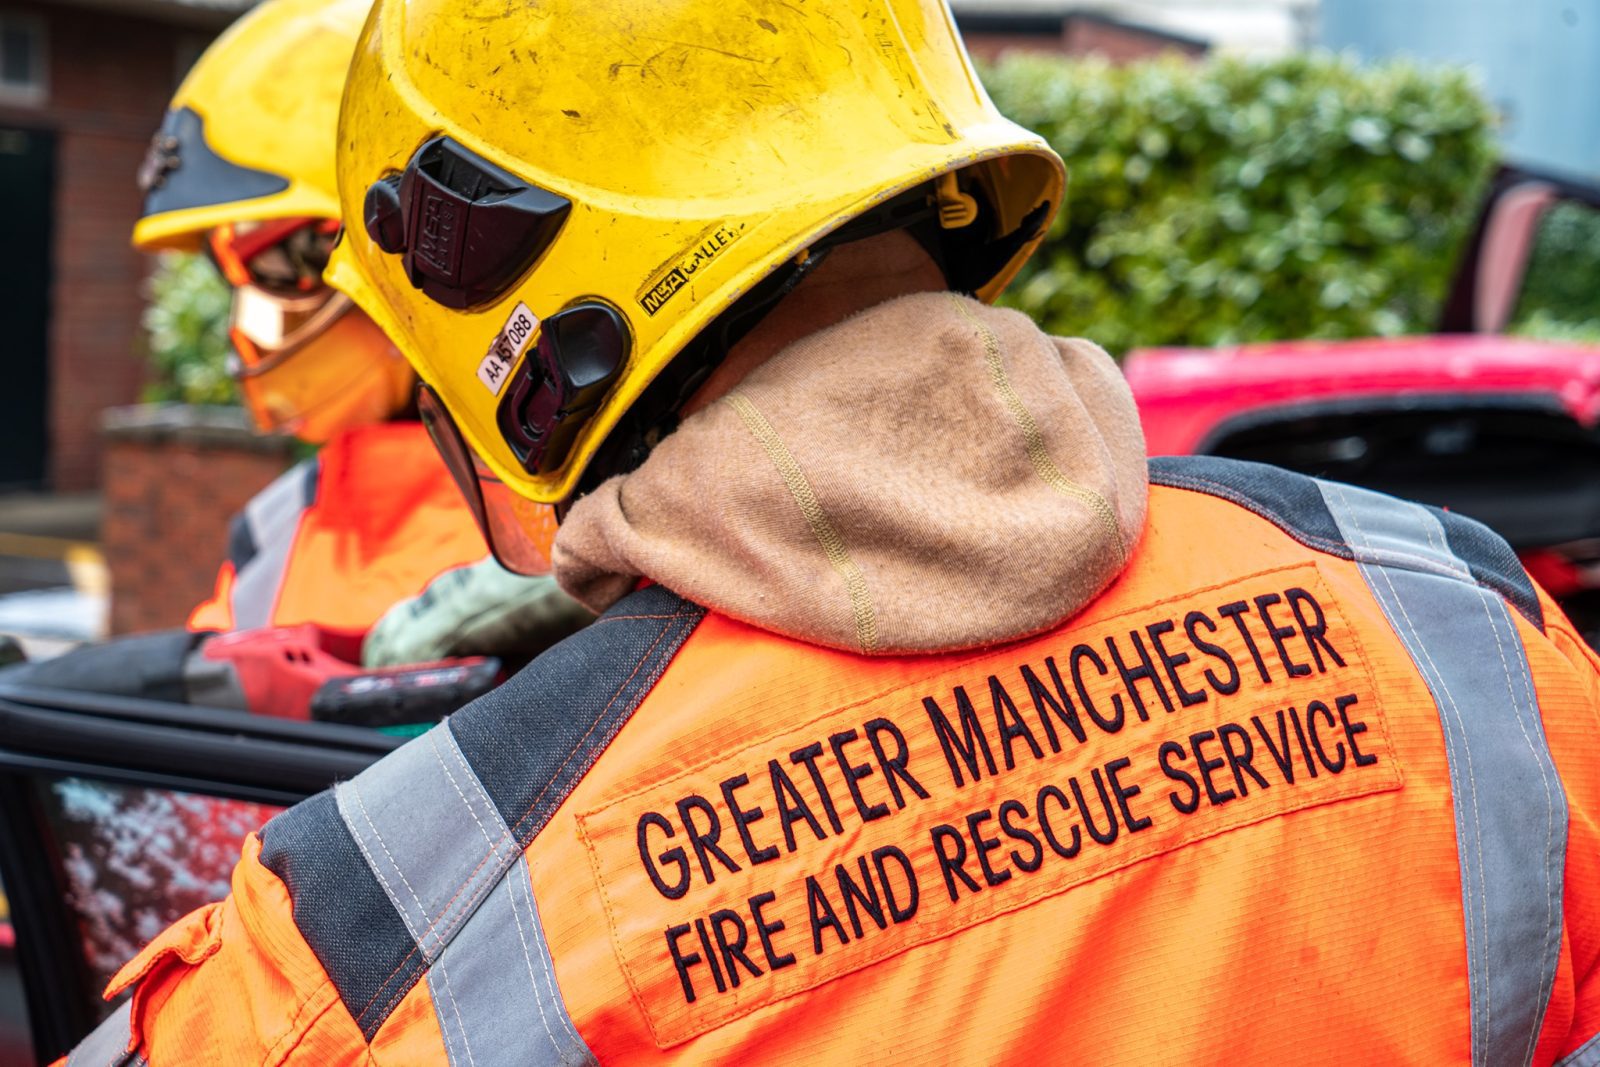 Firefighters in Greater Manchester are being given bullet proof vests, The Manc